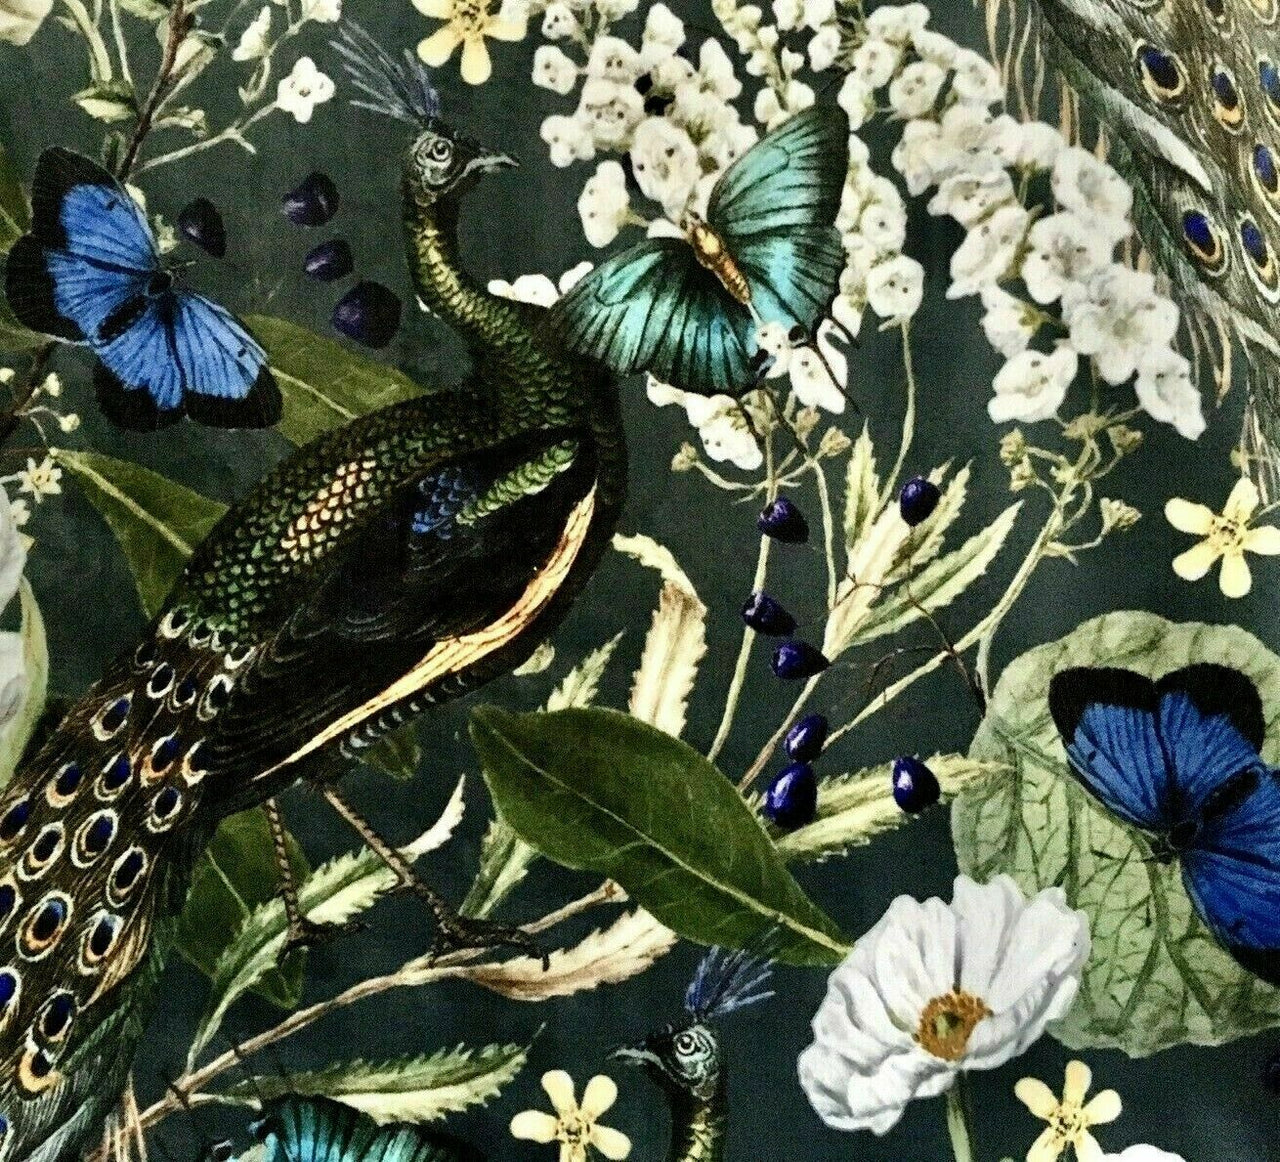 Peacock Luxury Italian Velvet by Meter Butterflies Birds Sewing Material Botanical Greenery Bird Pattern Textile for Upholstery Art Crafts Pillows Cushions